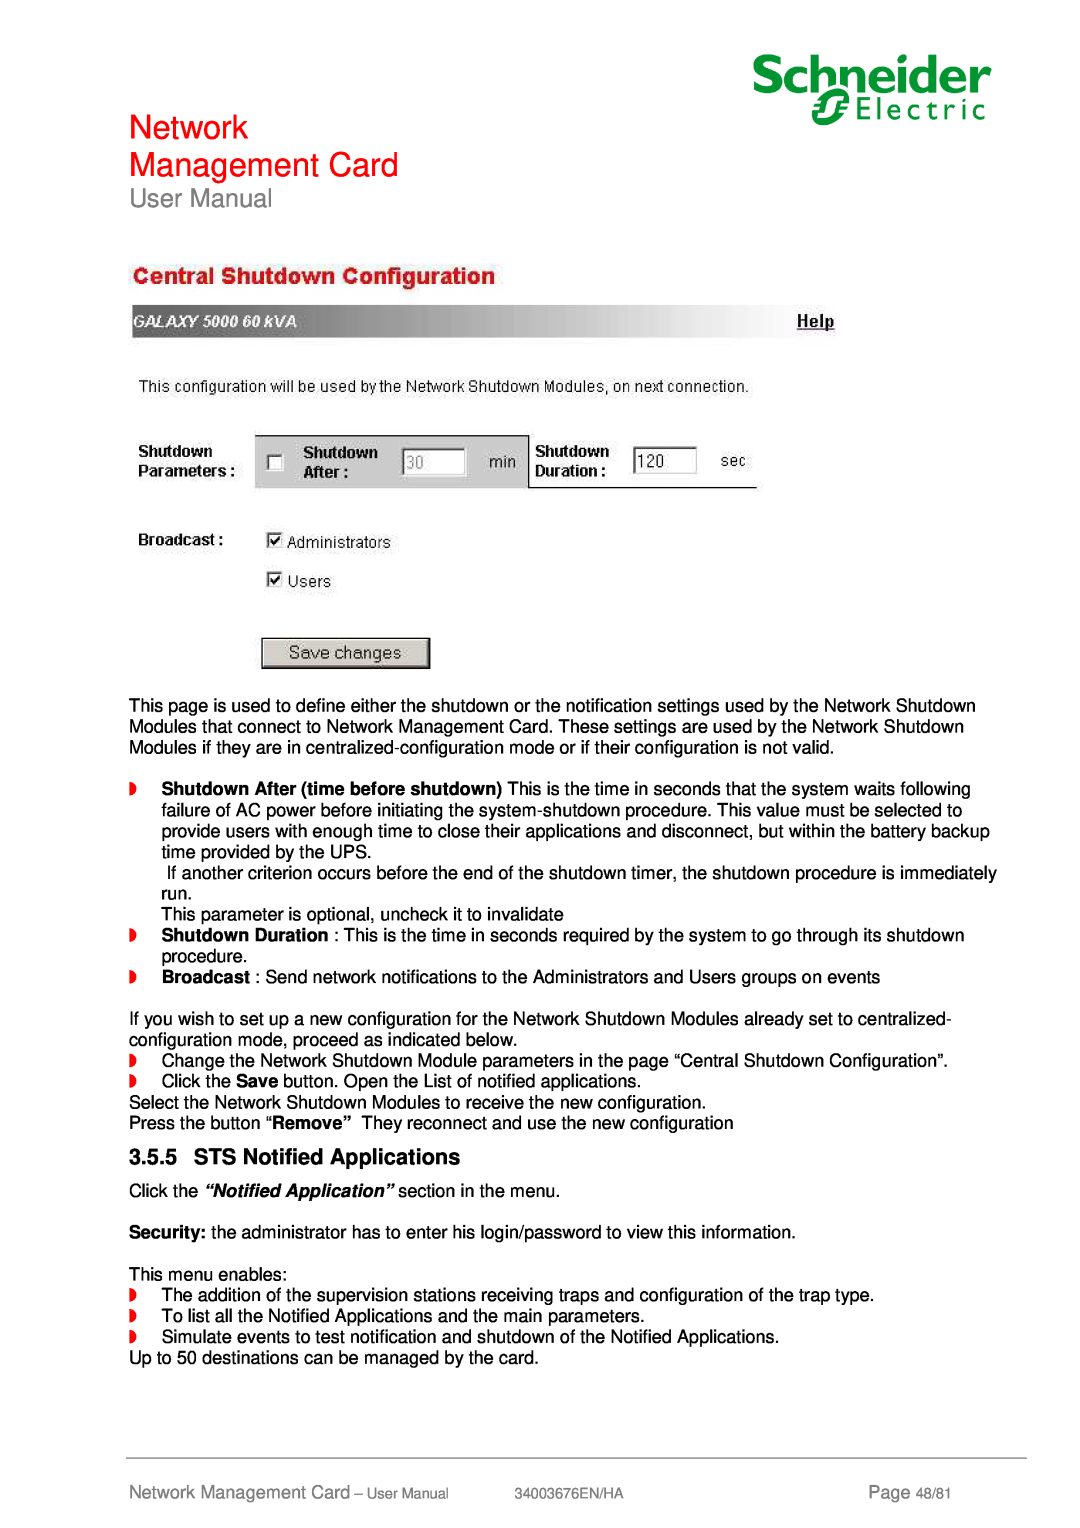 Schneider Electric 66846, 66074 user manual STS Notified Applications, Network Management Card, User Manual, Page 48/81 